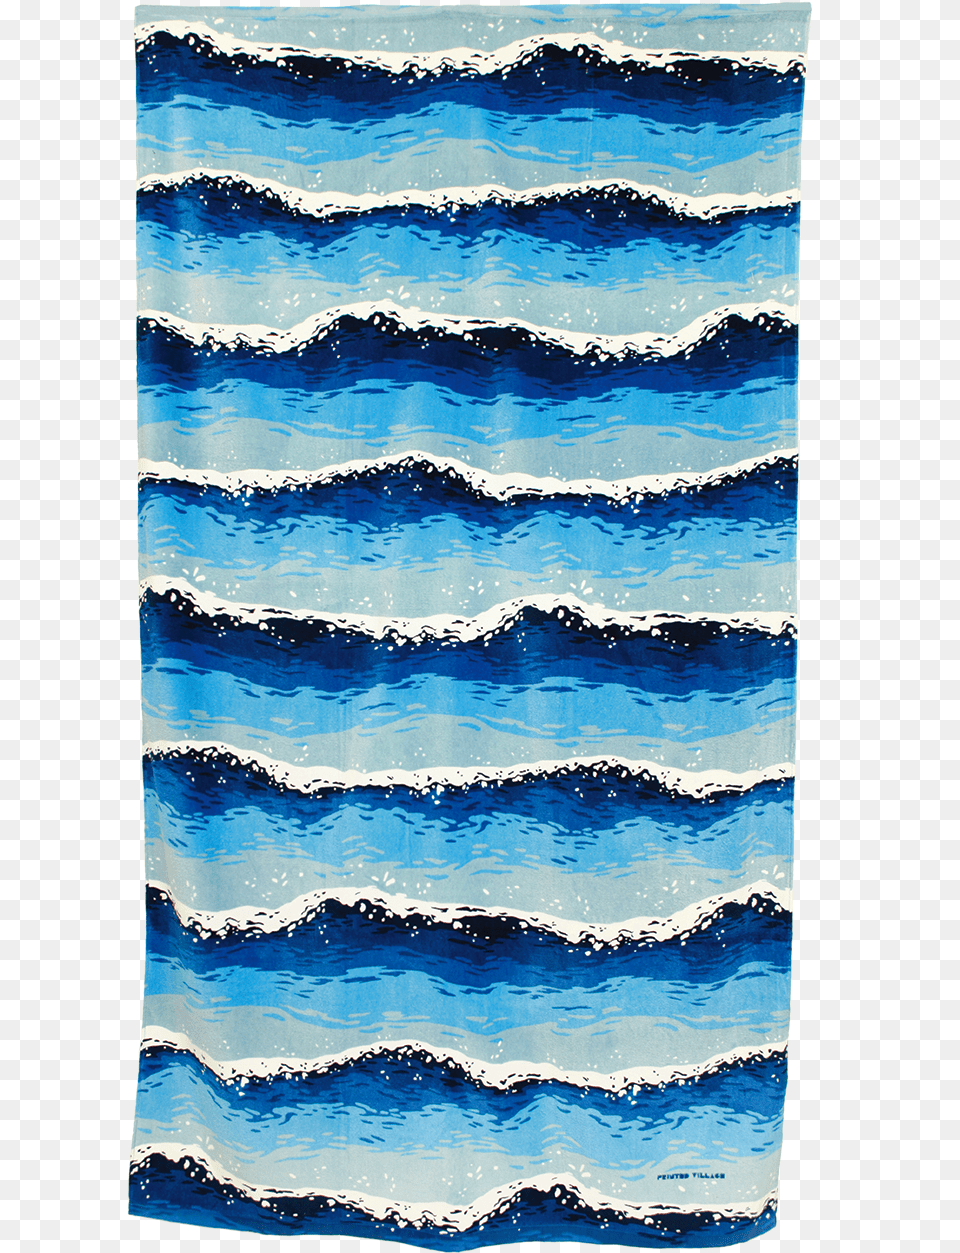 Printed Village Beach Towel Beach Towel Transparent Background, Home Decor, Art, Painting, Swimming Pool Png Image